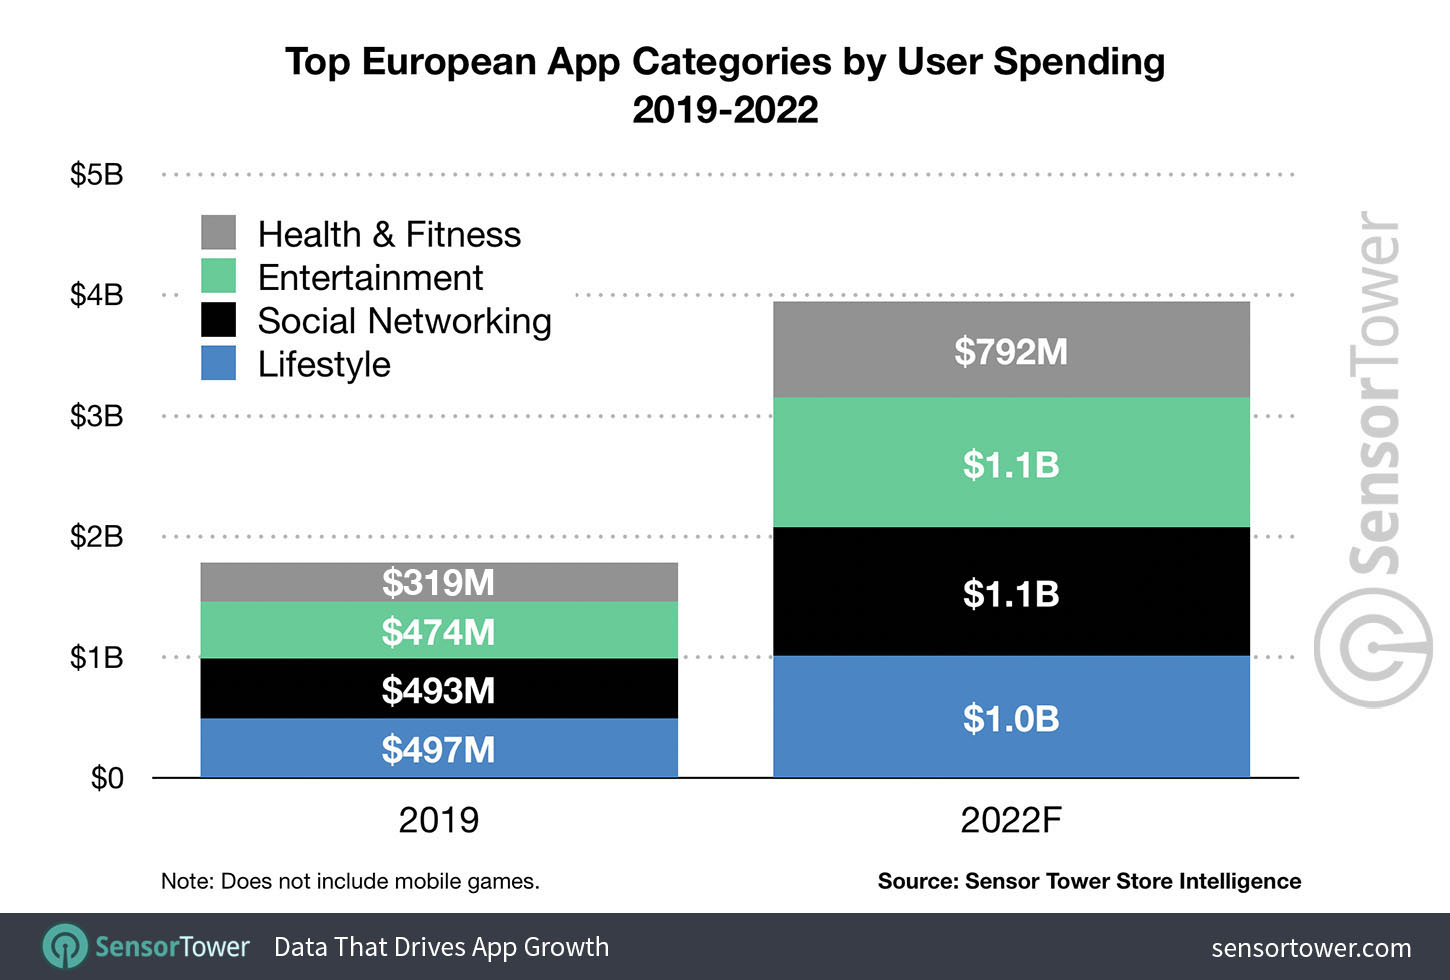 Top European App Categories by User Spending for 2019 to 2022